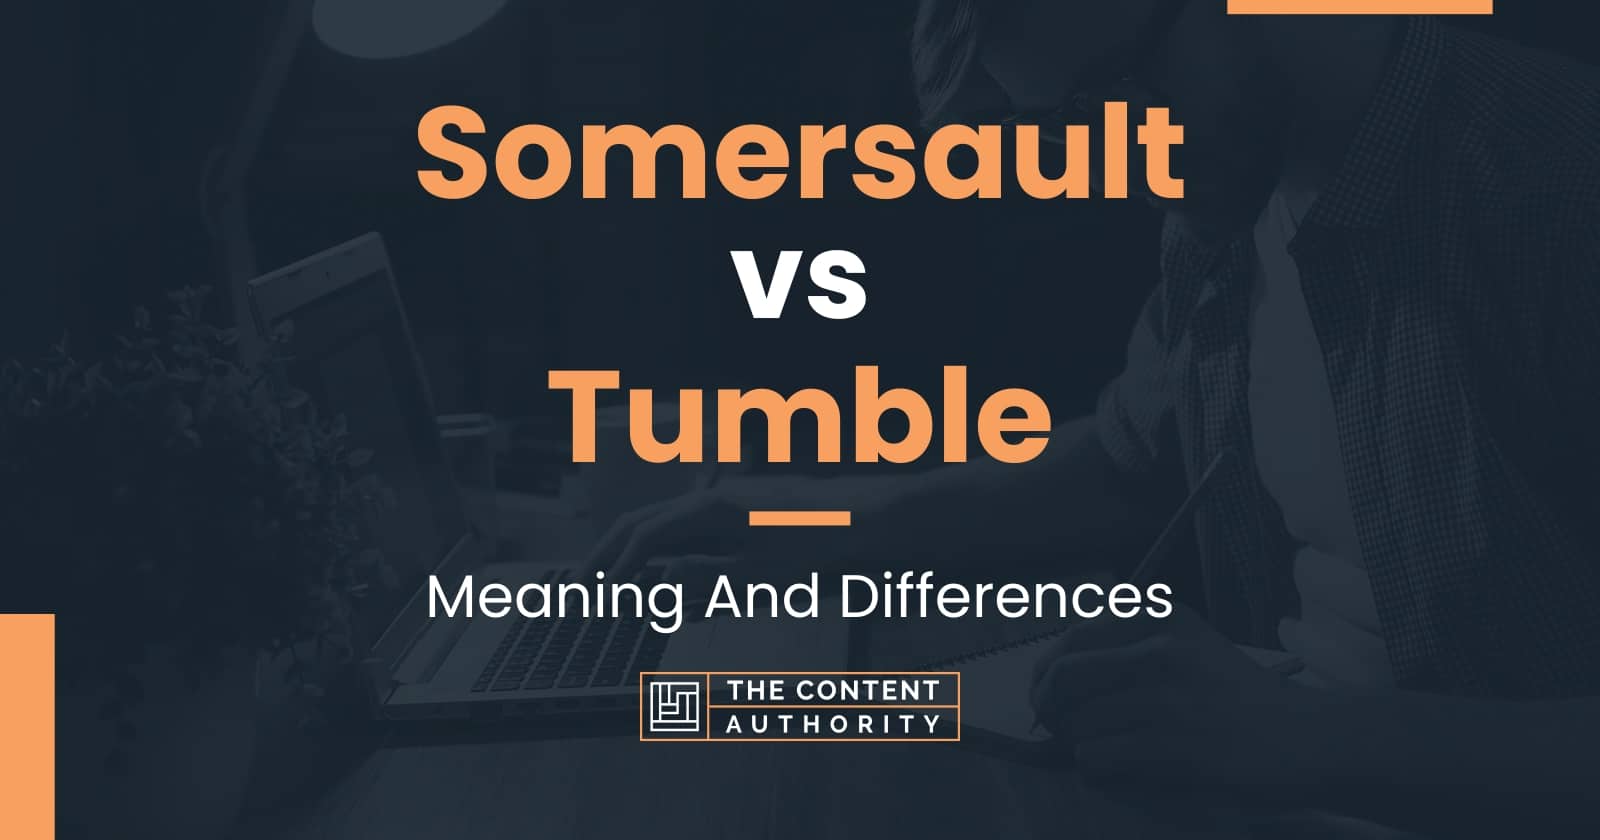 Somersault vs Tumble: Meaning And Differences